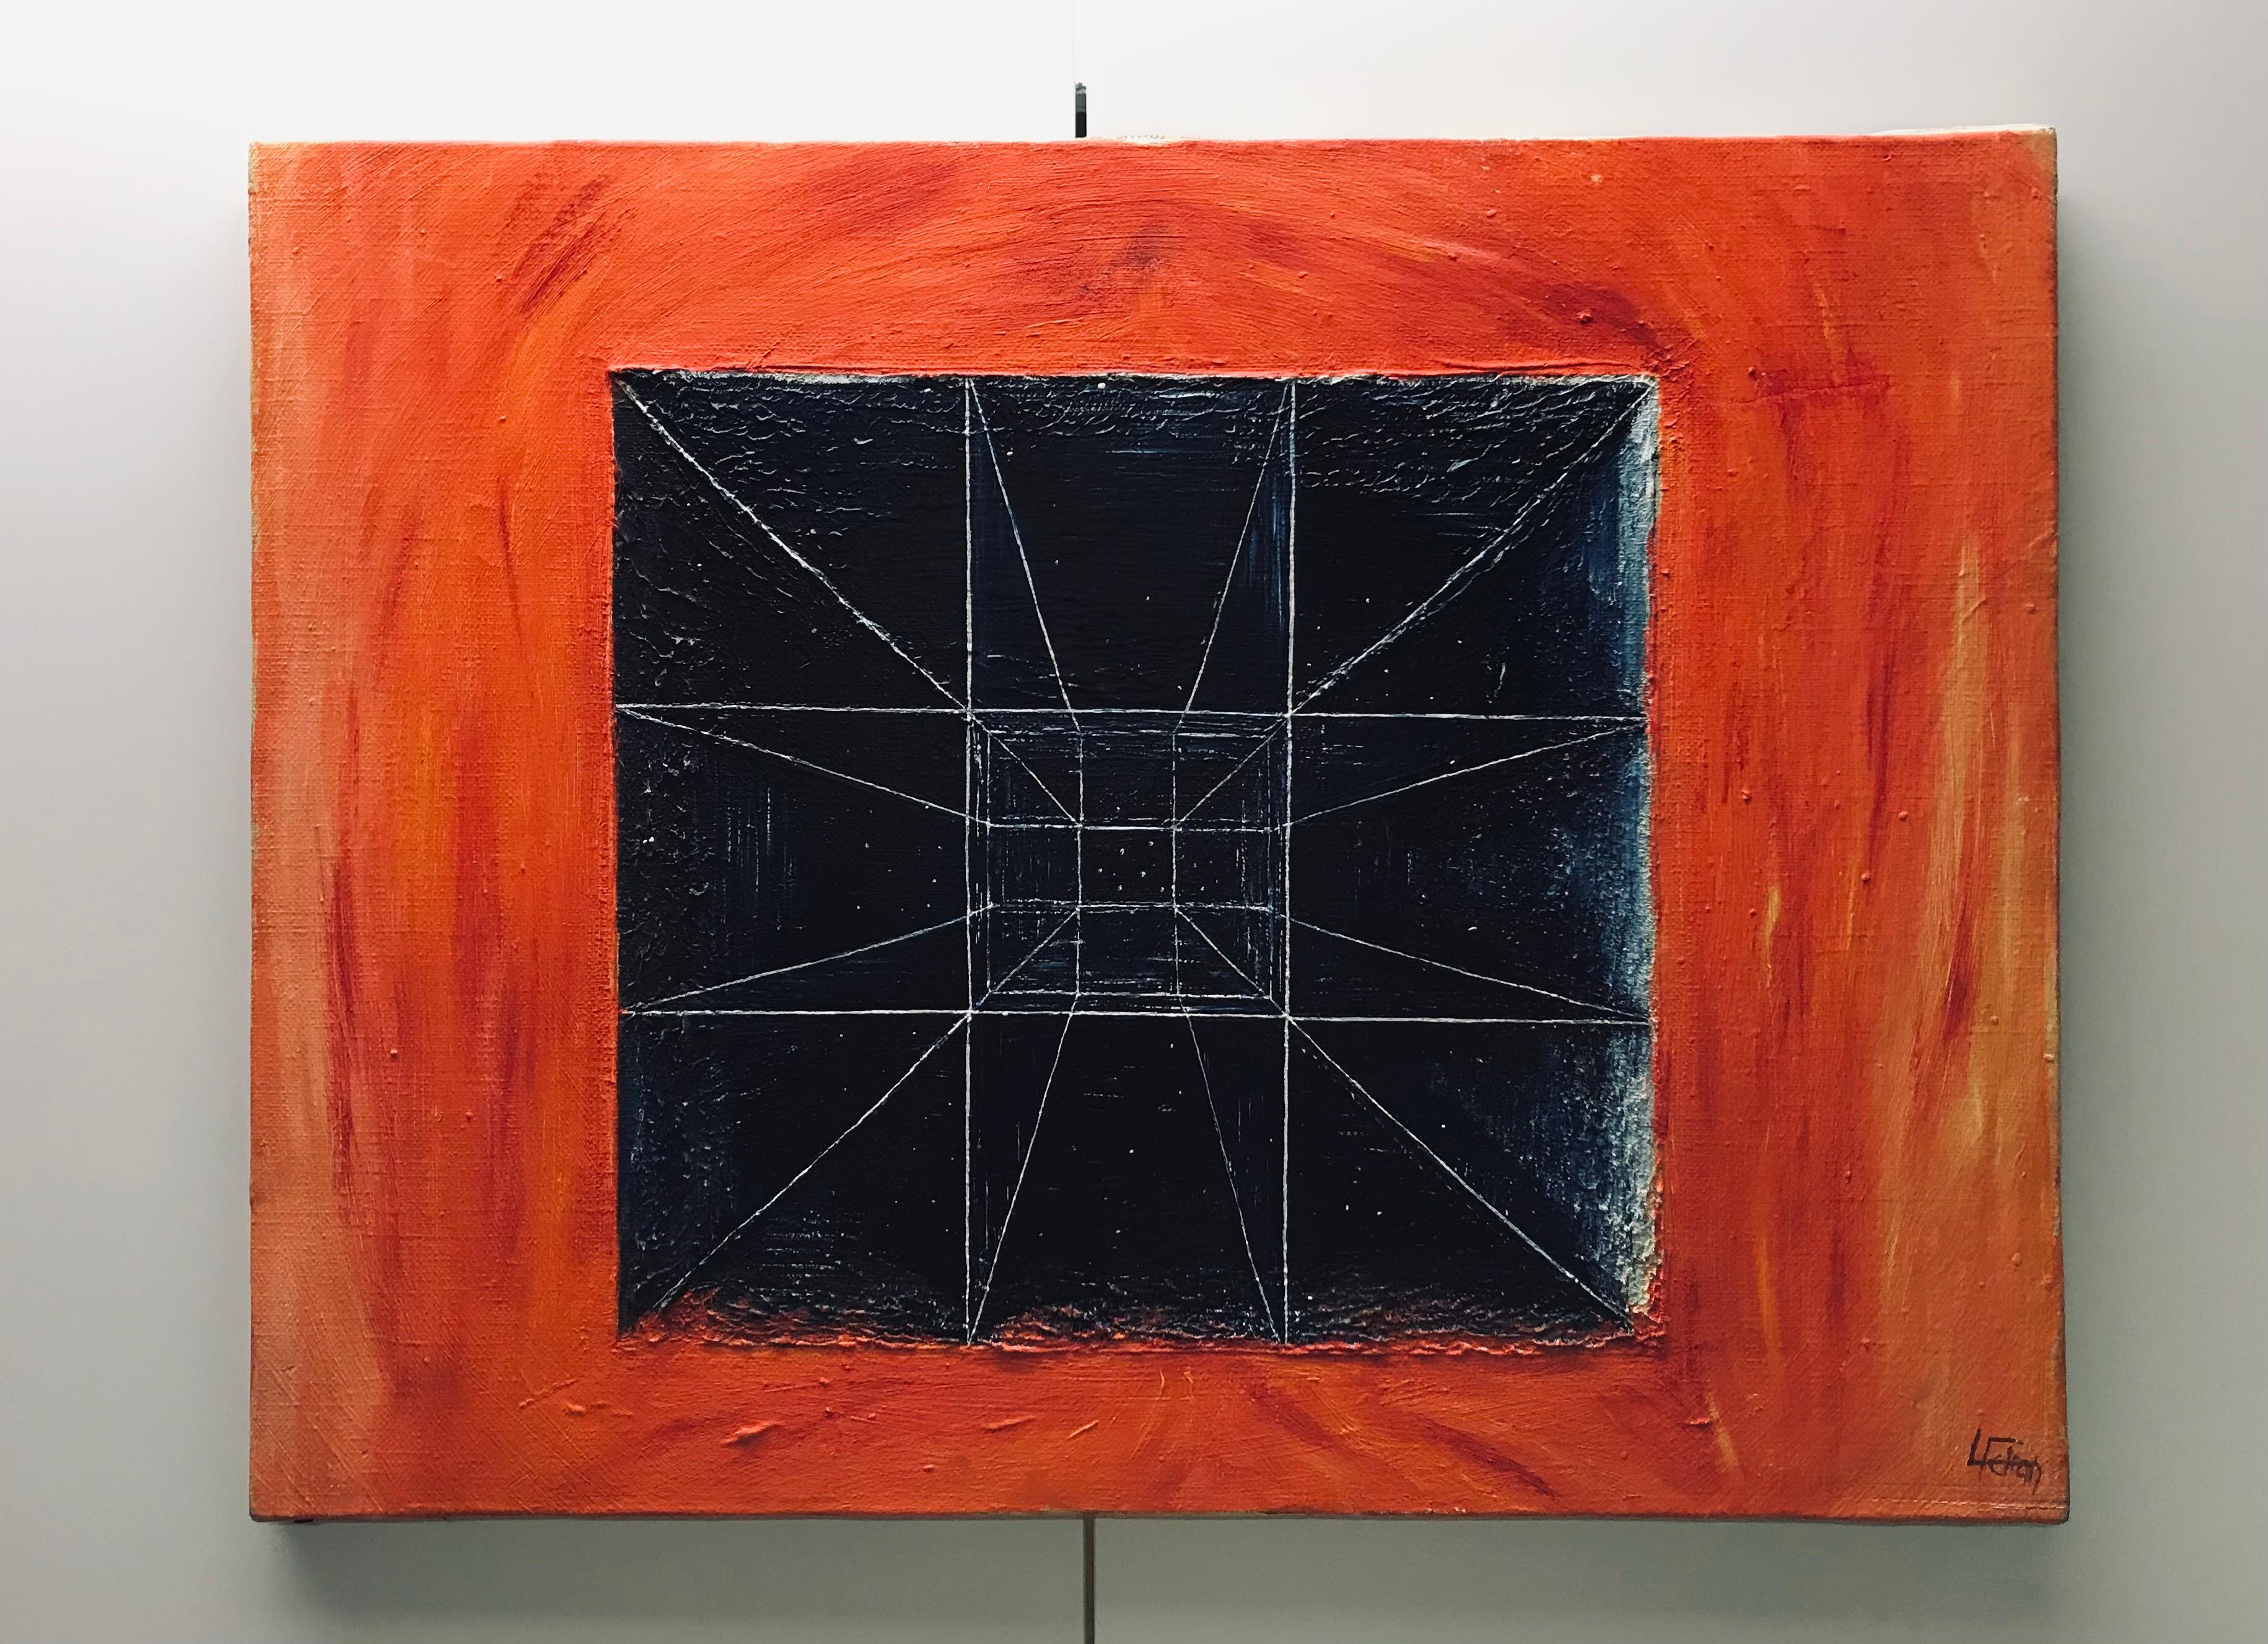 Geometric composition by L.P Dean - Oil paint on paper and canvas - Painting by L.P. Dran